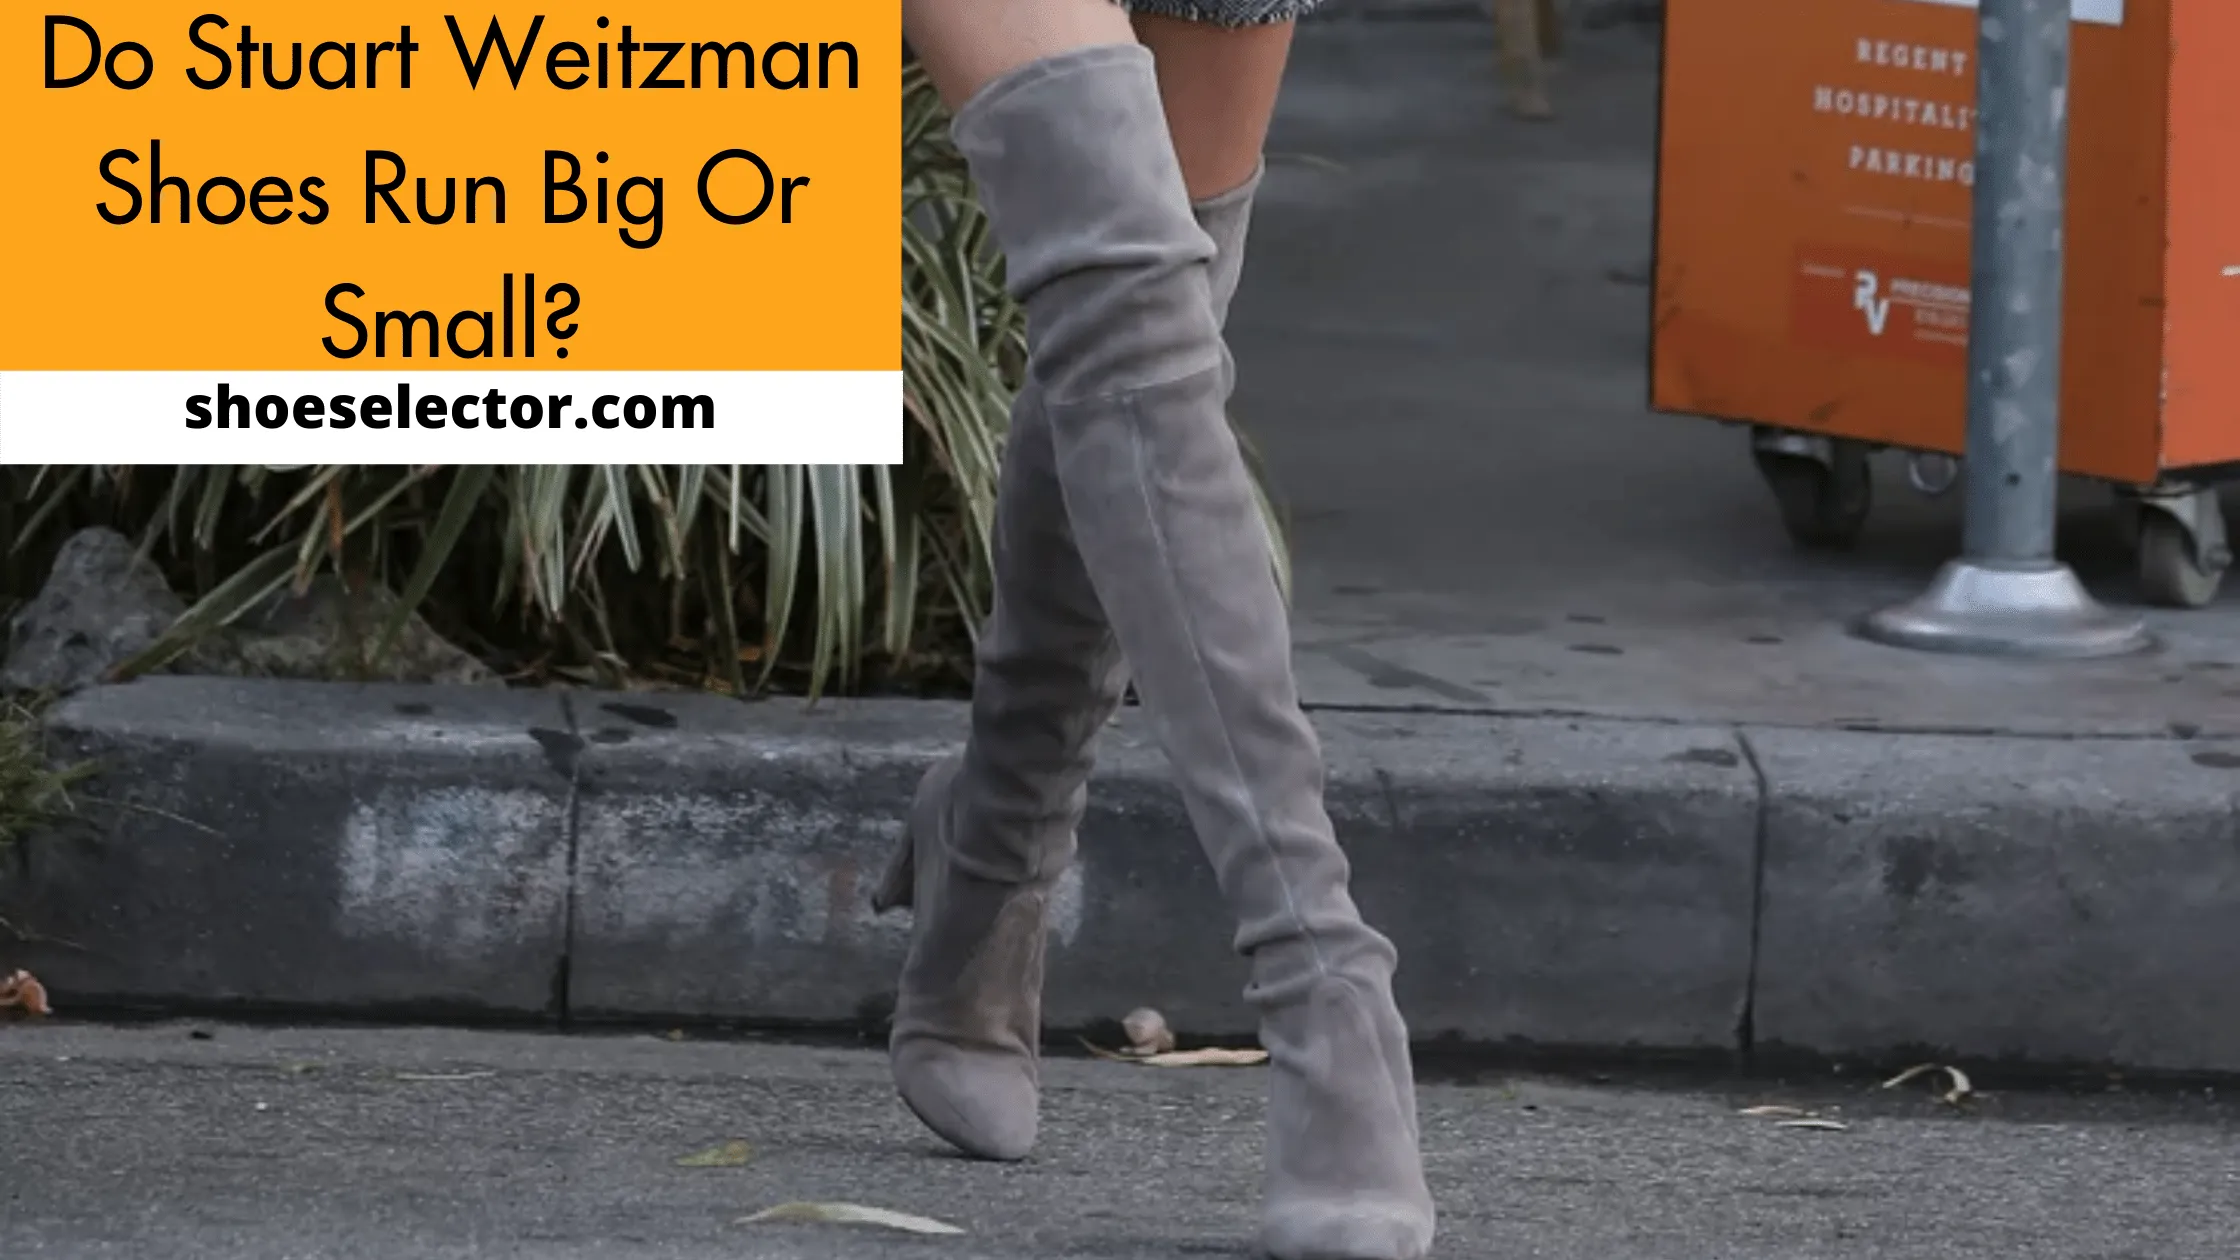 Do Stuart Weitzman Shoes Run Small or Big, True to Size?